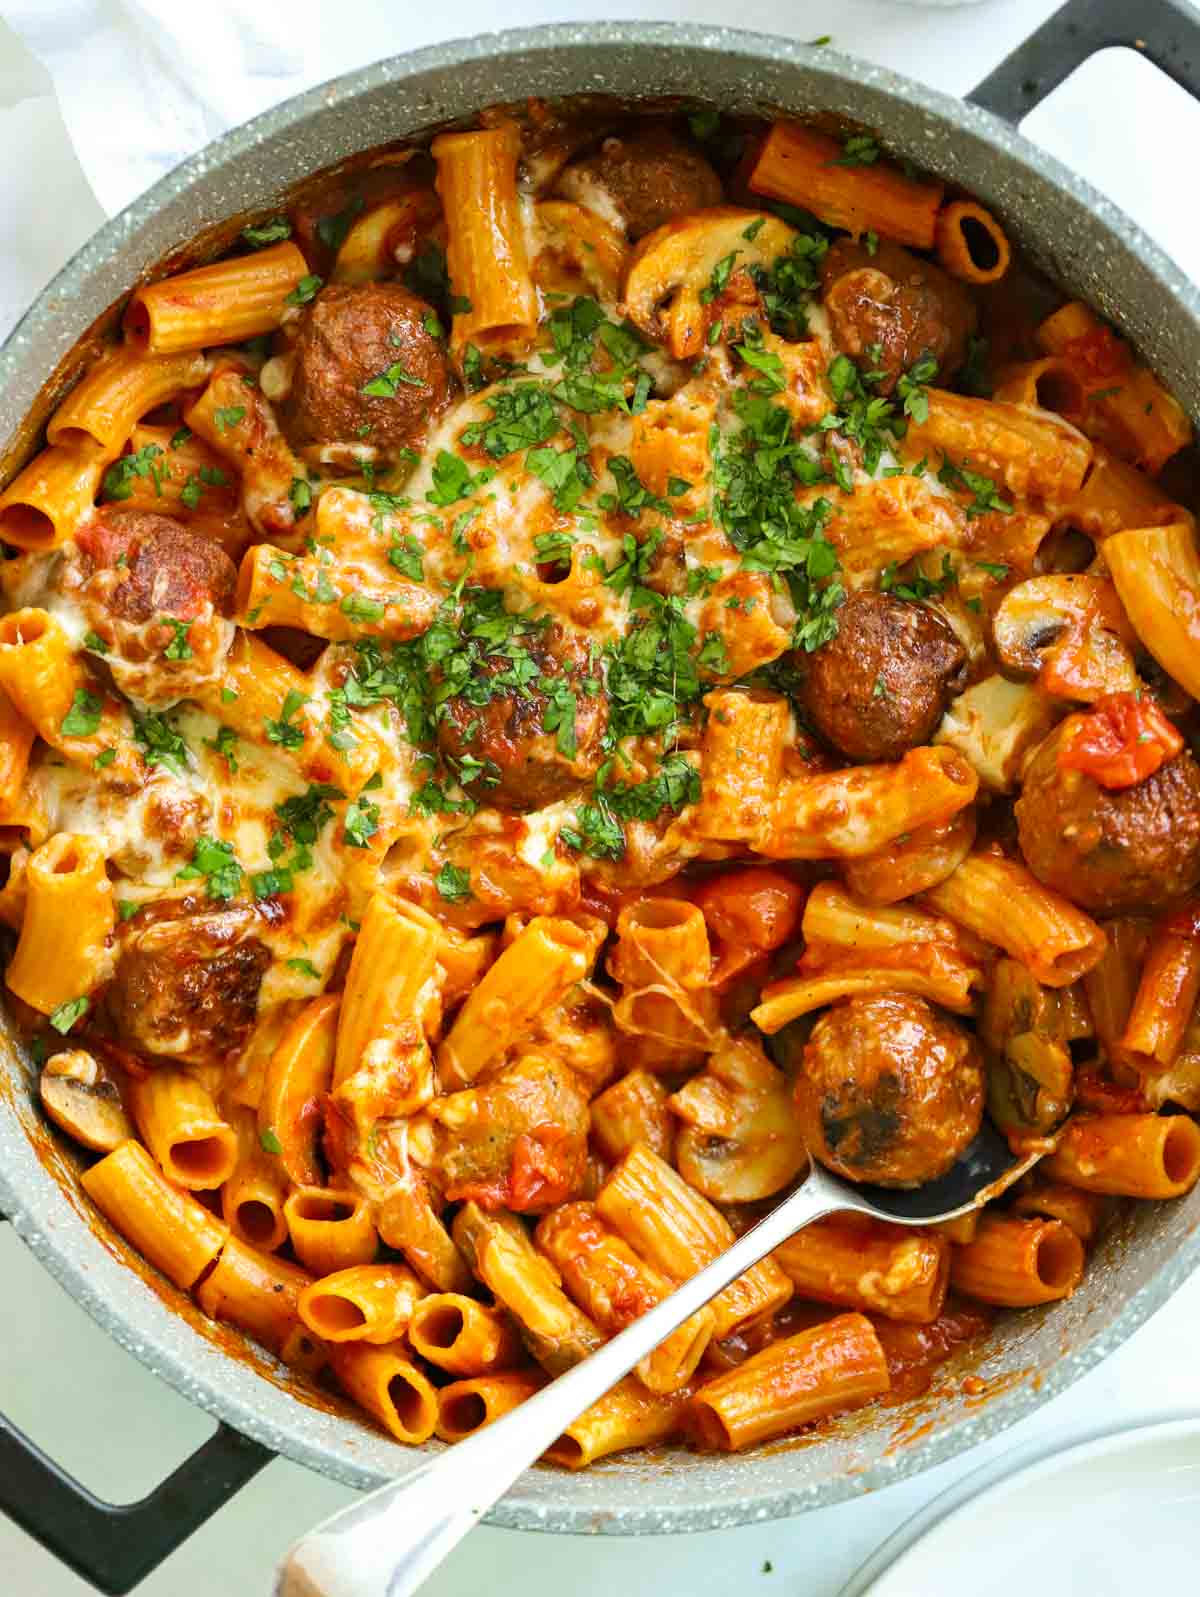 Big panful of Meatball Pasta Bake. A delicious 30 minute recipe.